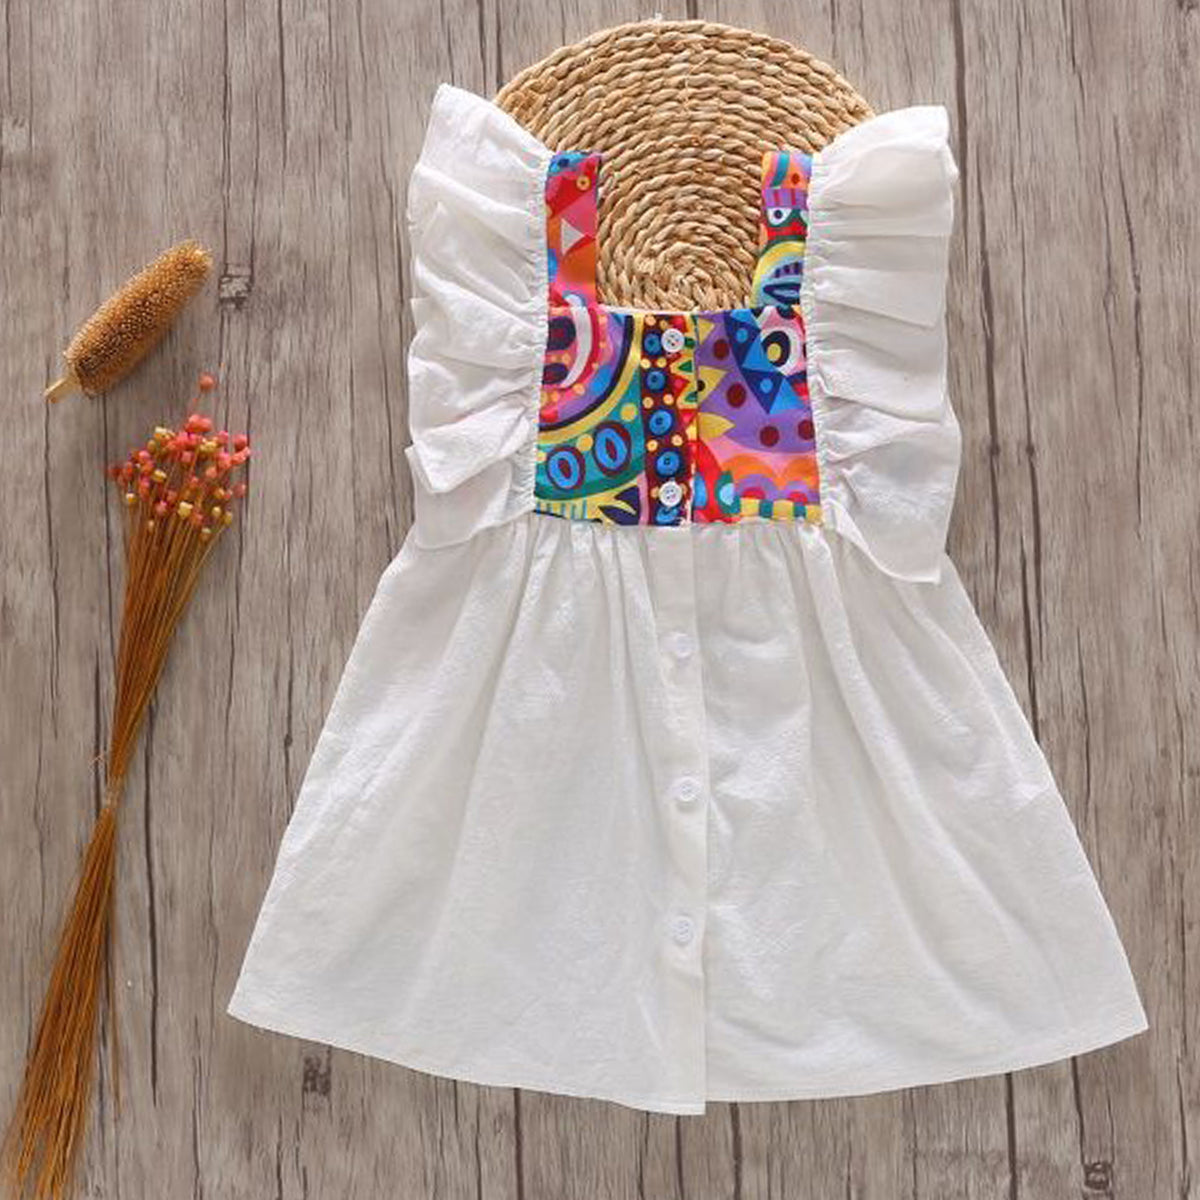 Princess BabyGirl's Yellow Lining_White Pocket Tunic Dresses_Frocks Combo for Kids.